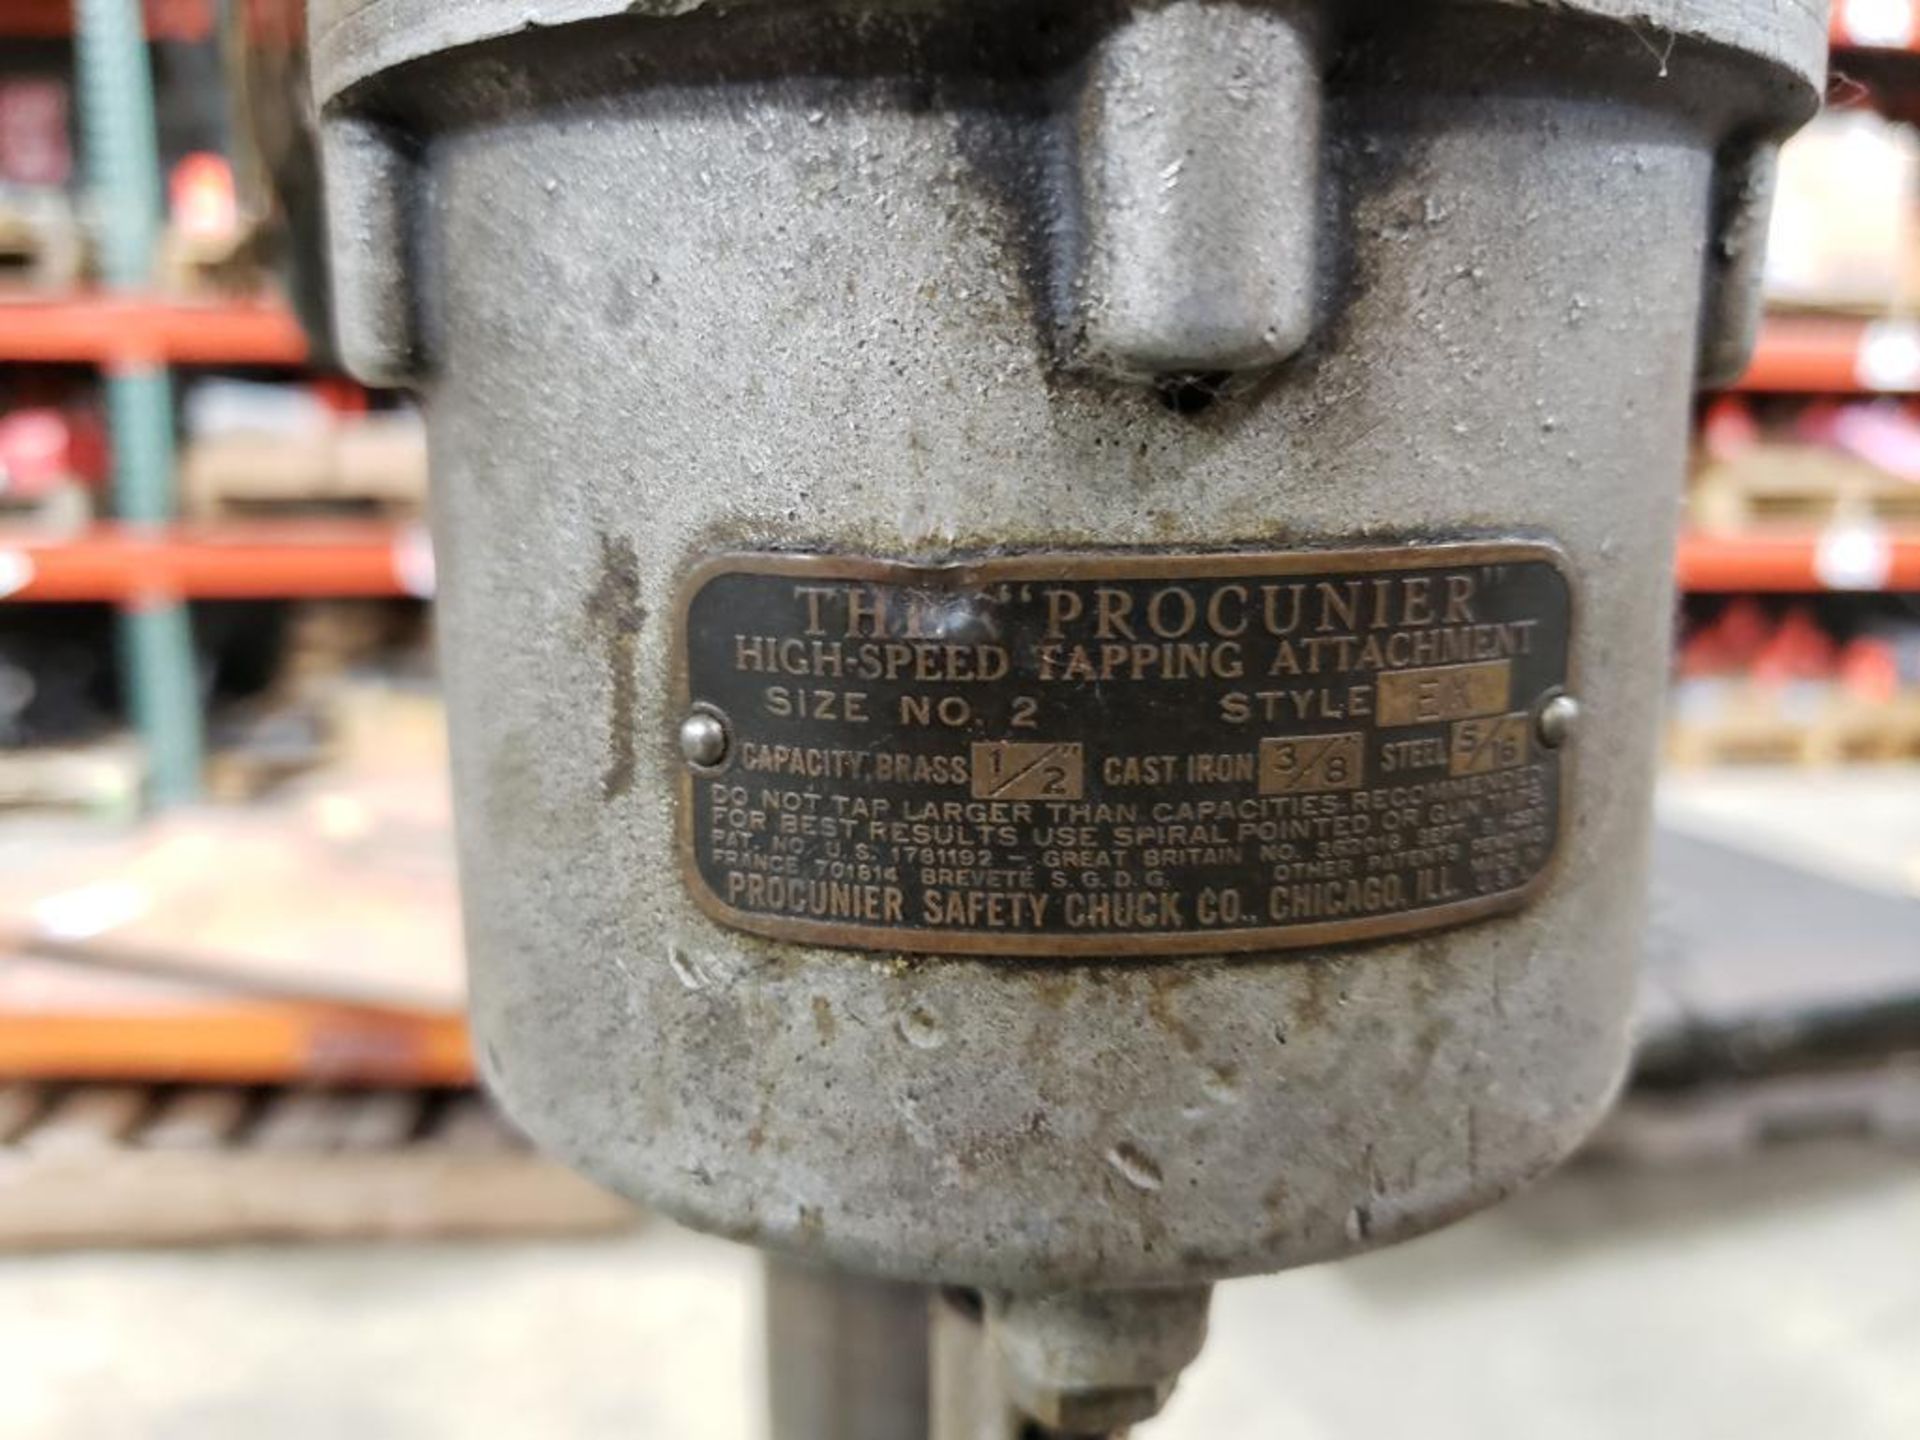 1/2hp Milwaukee Delta drill press with tapping head. 115v single phase. - Image 5 of 10